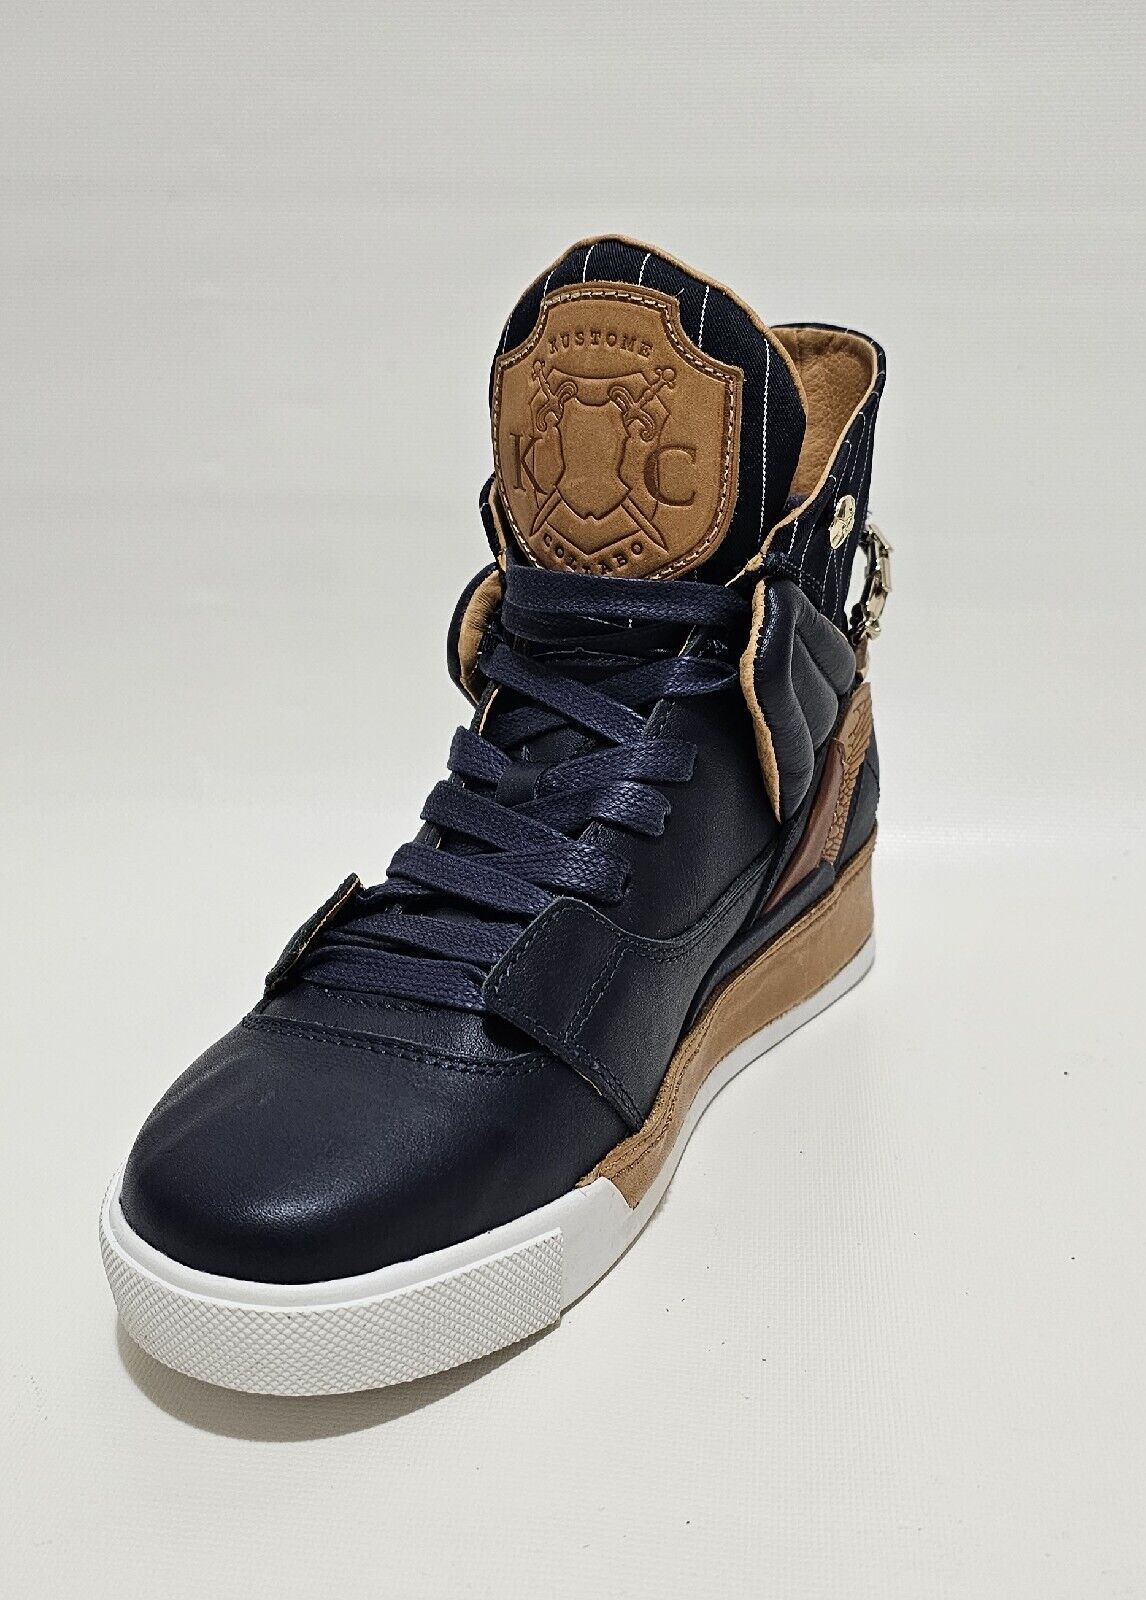 Kustome Collabo Renaissance Bleu Cuir Luxe Sneaker Collection Homme Taille 8